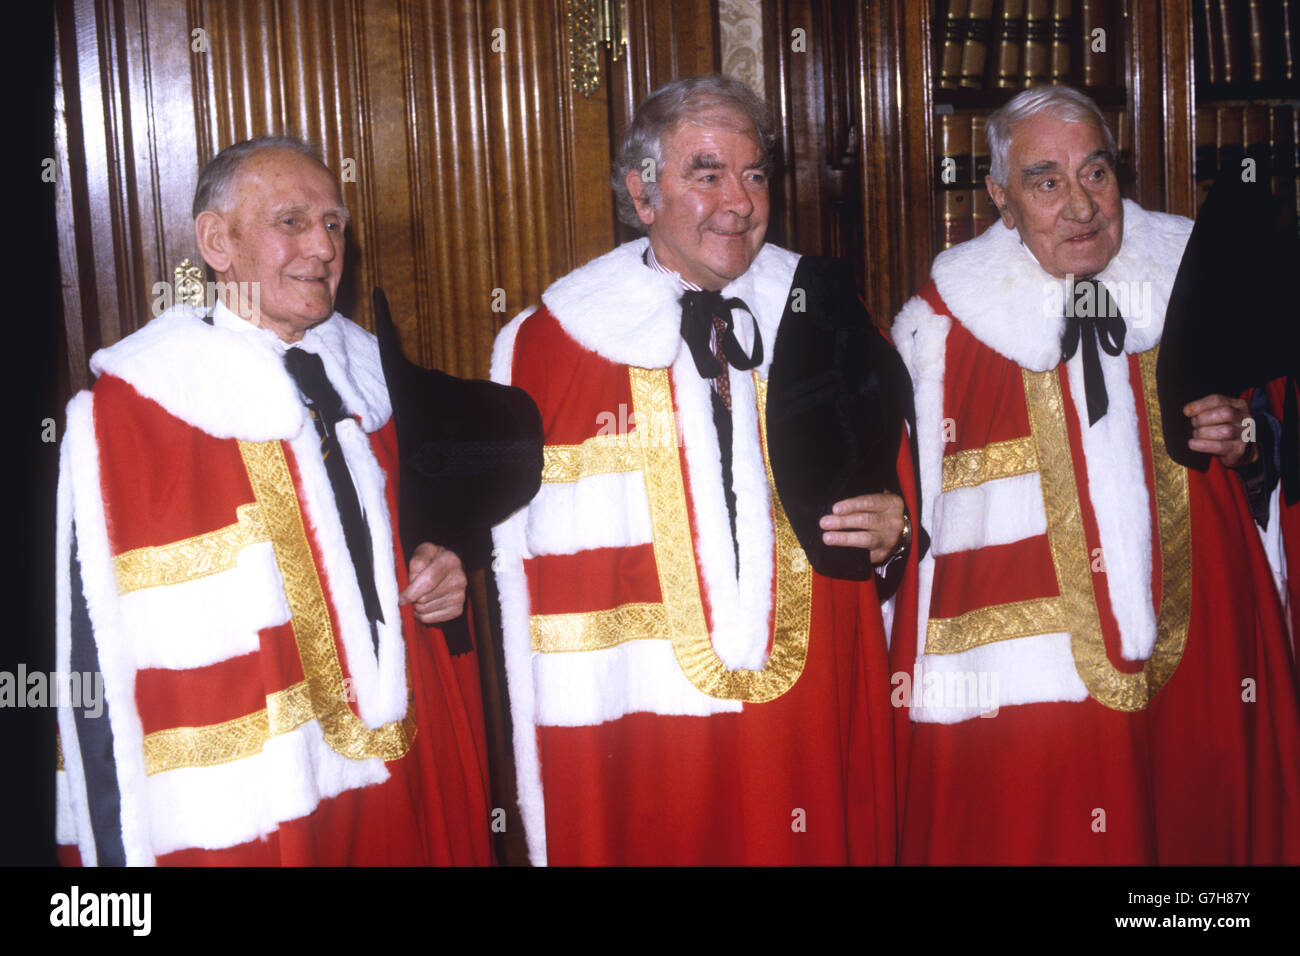 Lord Gormley (centre) with his sponsors Lord Taylor (l) and Lord Blyton in the robing room of the House of Lords before he was introduced to the house. Stock Photo